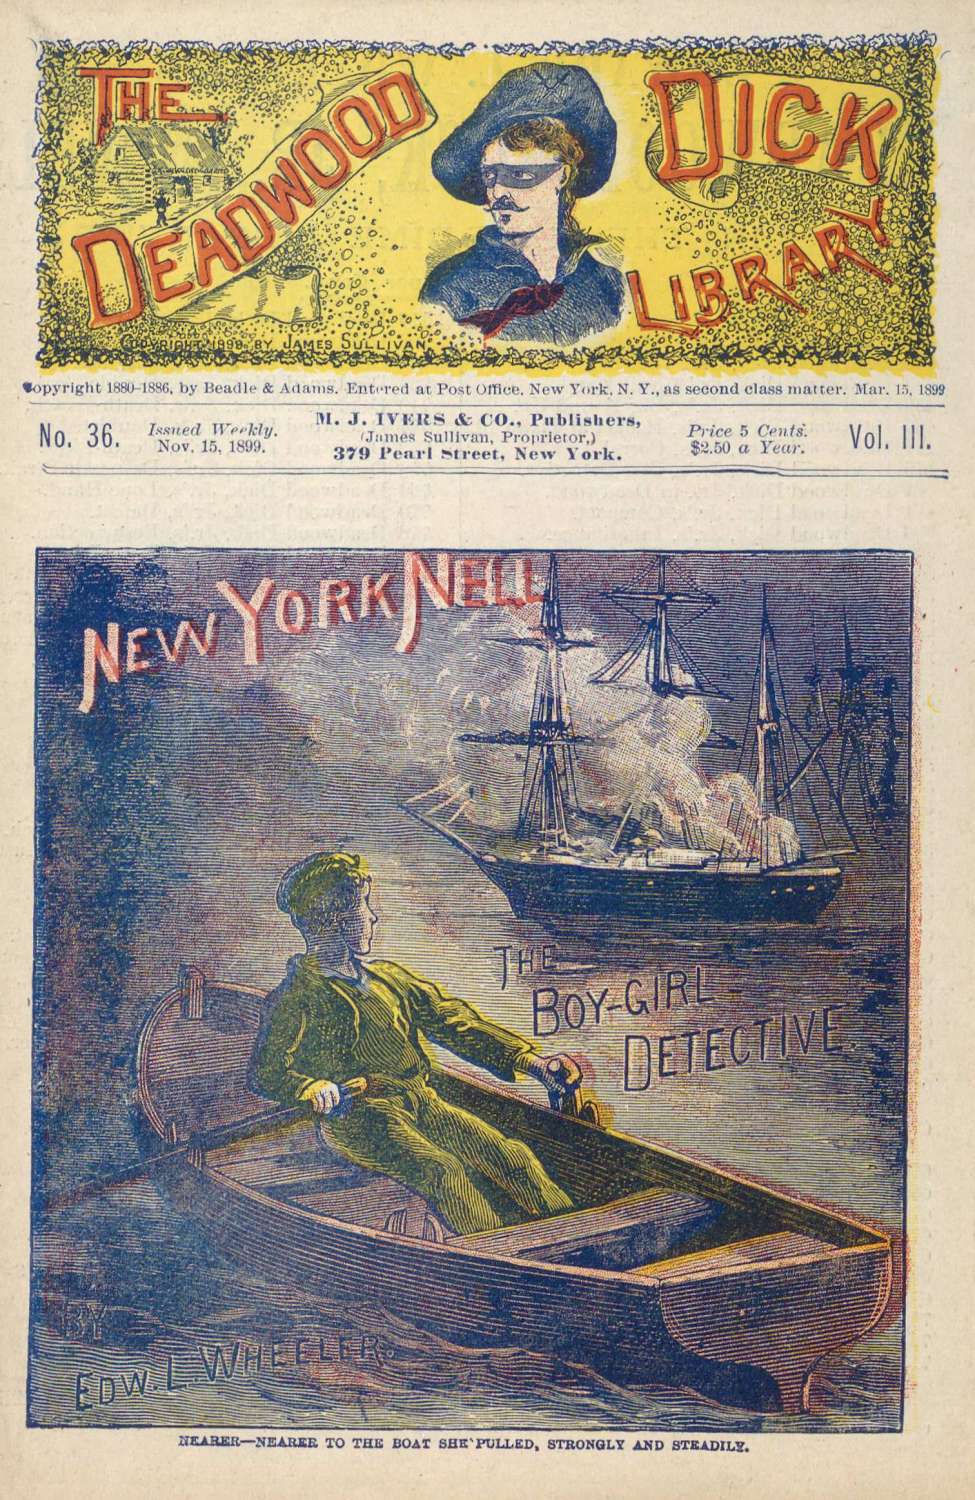 Book Cover For Deadwood Dick Library v2 36 - New York Nell, the Boy-Girl Detective